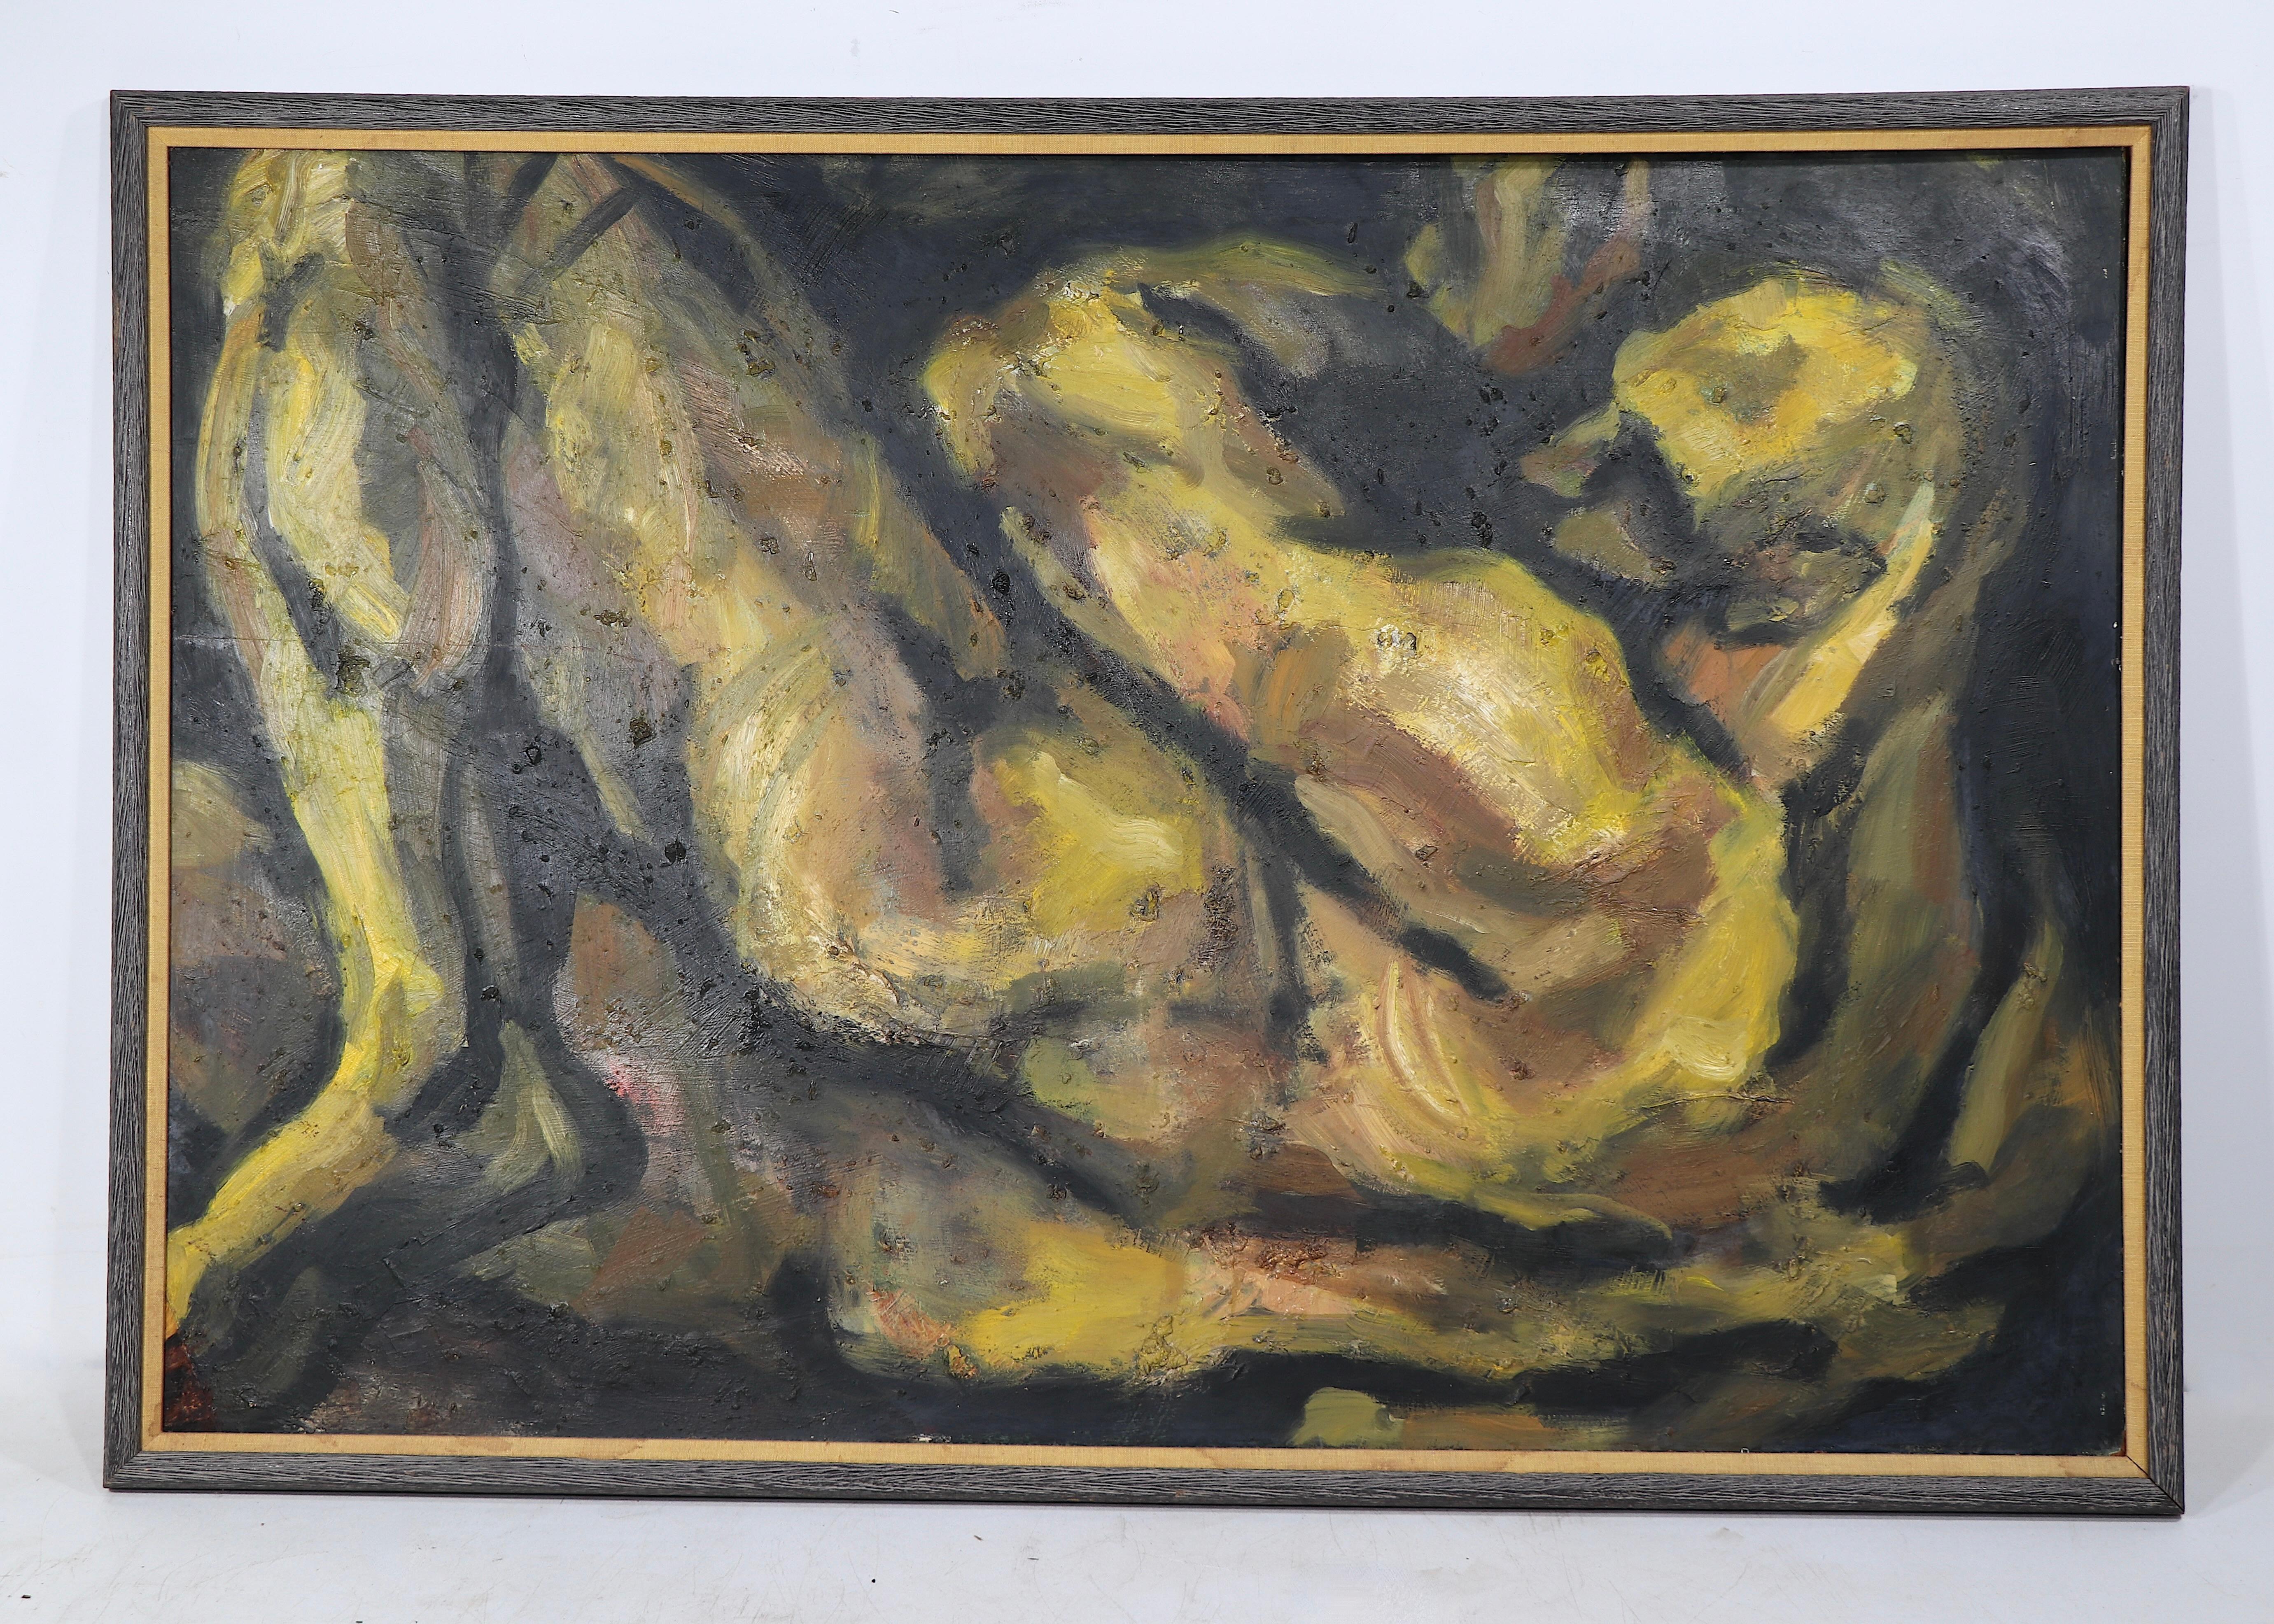 Large expressionist painting of a naked man in a curled up, almost in a  fetal position. The male figure is painted in tonal yellow and browns, with black detail, contrasted against a darker tonal background. The painting is executed in acrylic on